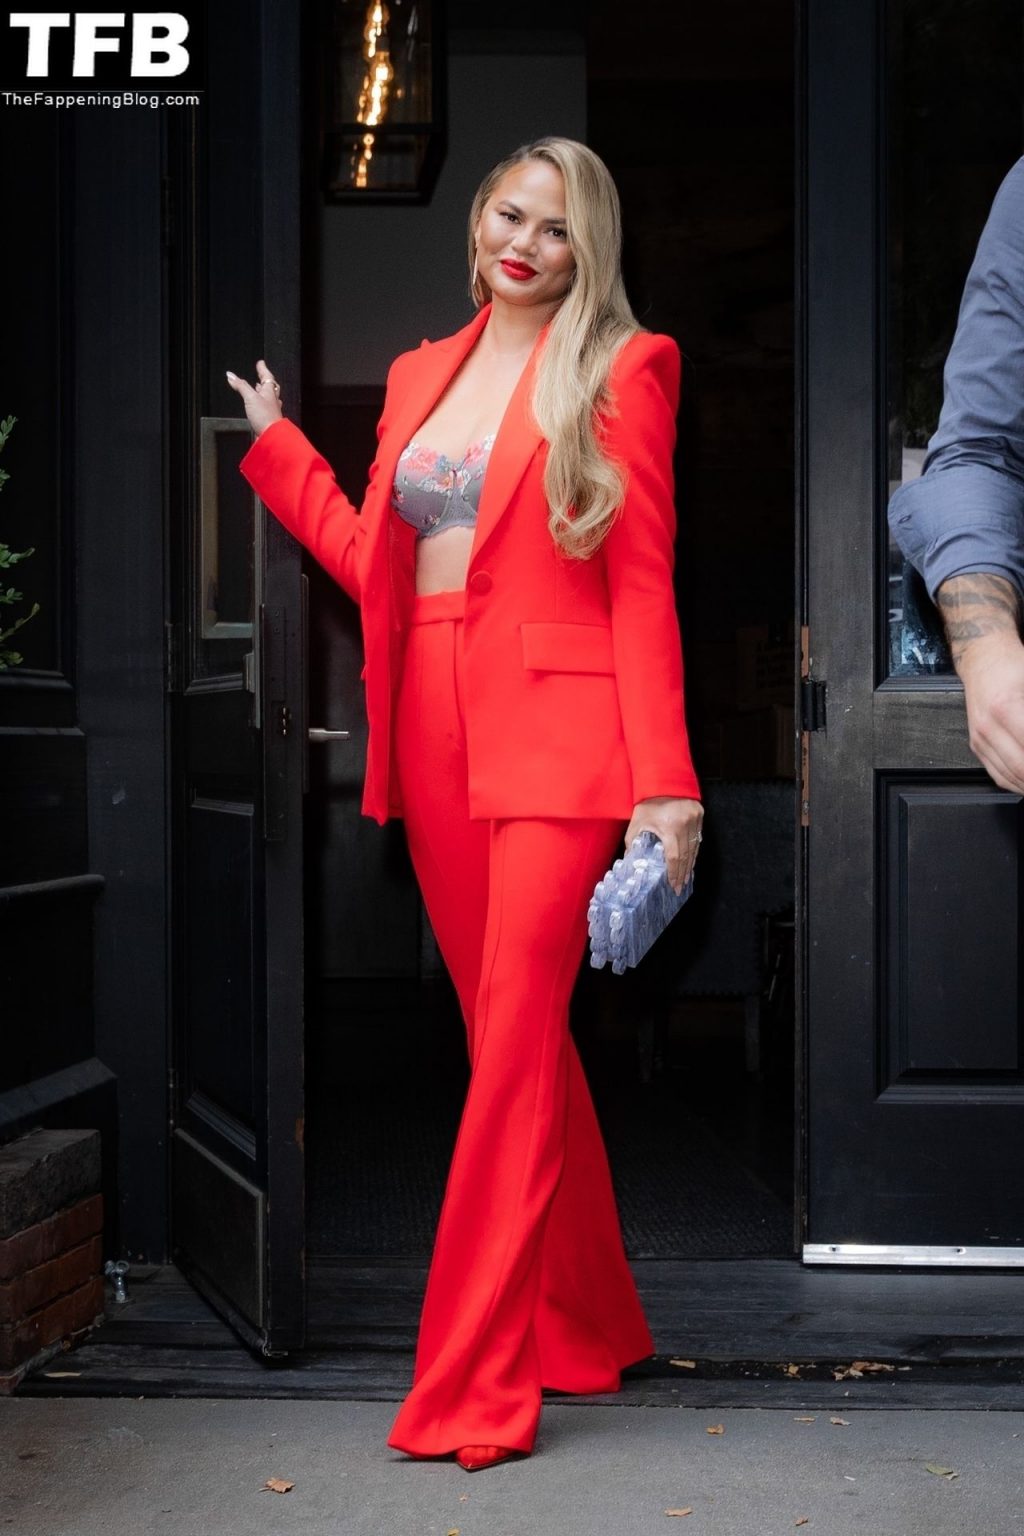 Chrissy Teigen Looks Hot in Red as she Heads to The Wendy Williams Show in NYC (10 Photos)